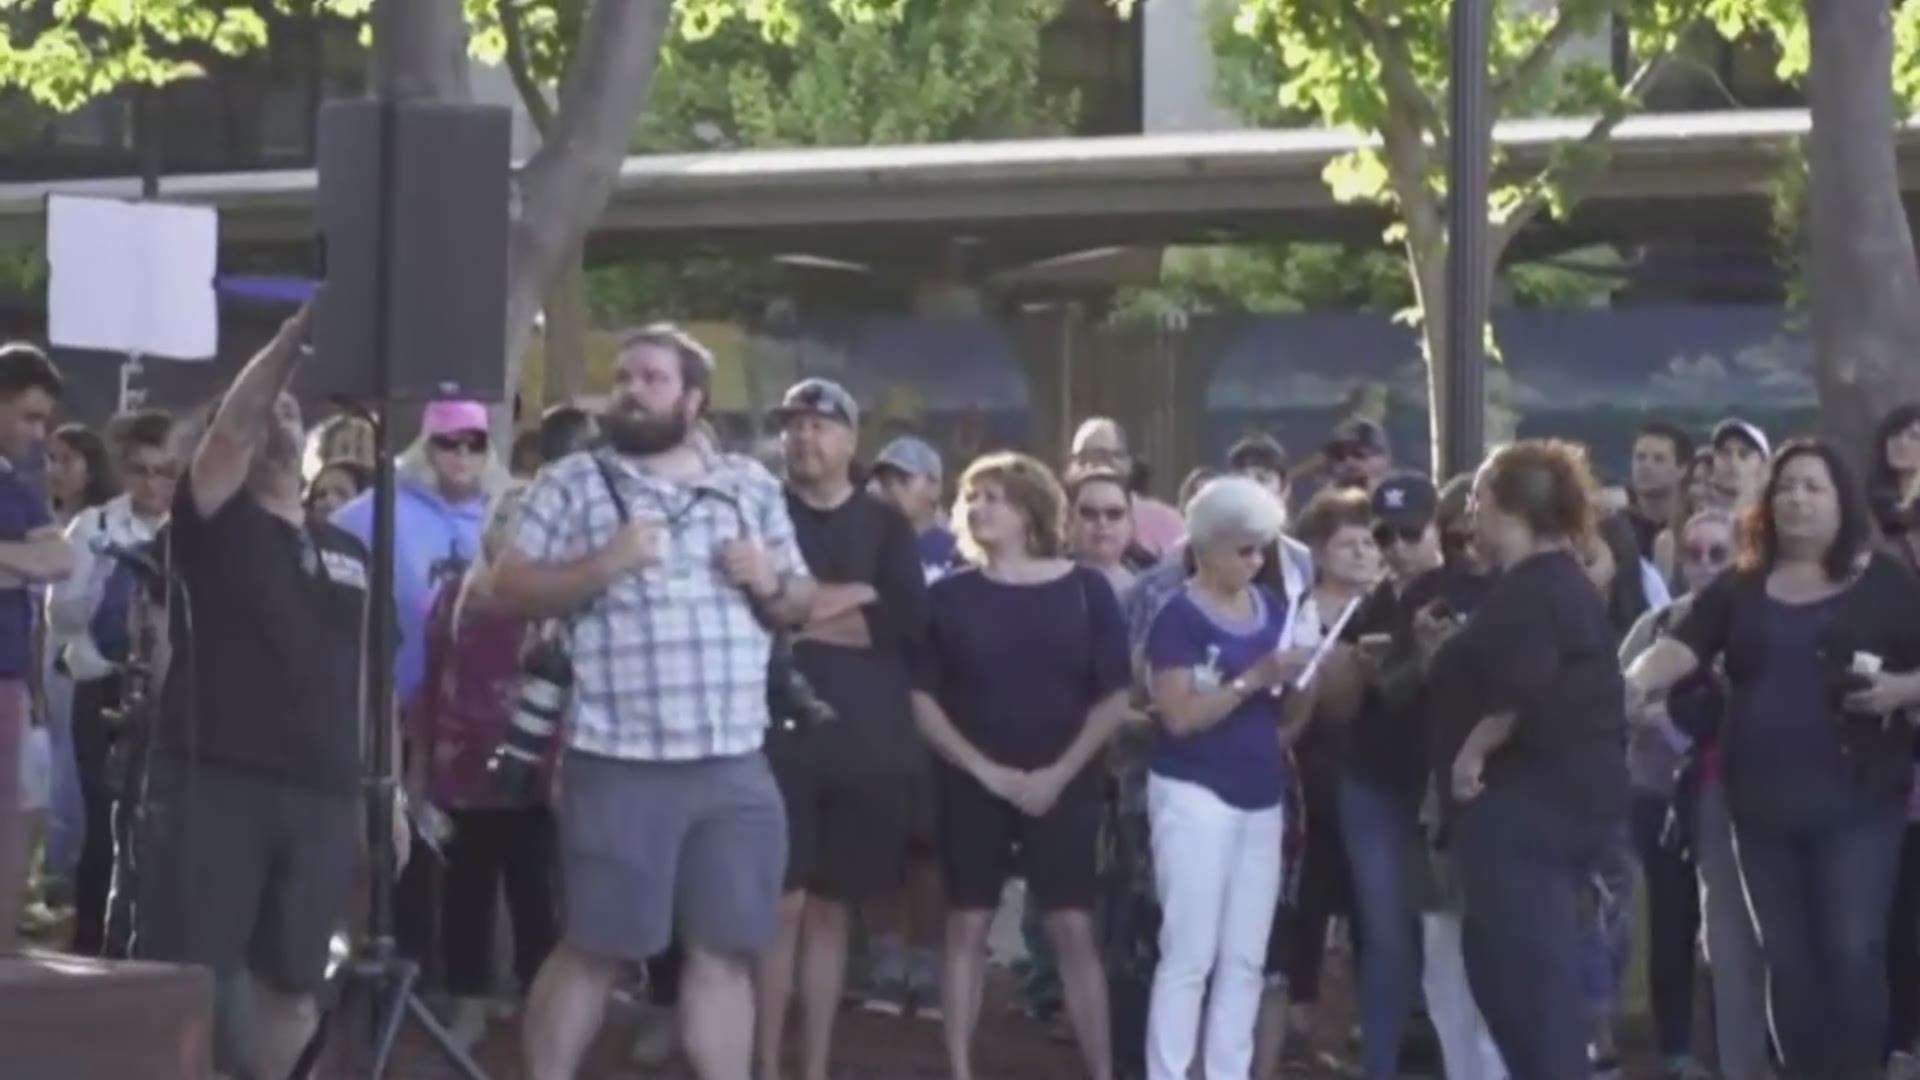 Gilroy community members and residents from around Northern California come together to mourn the loss of the three people killed in the Gilroy Garlic Festival shooting.